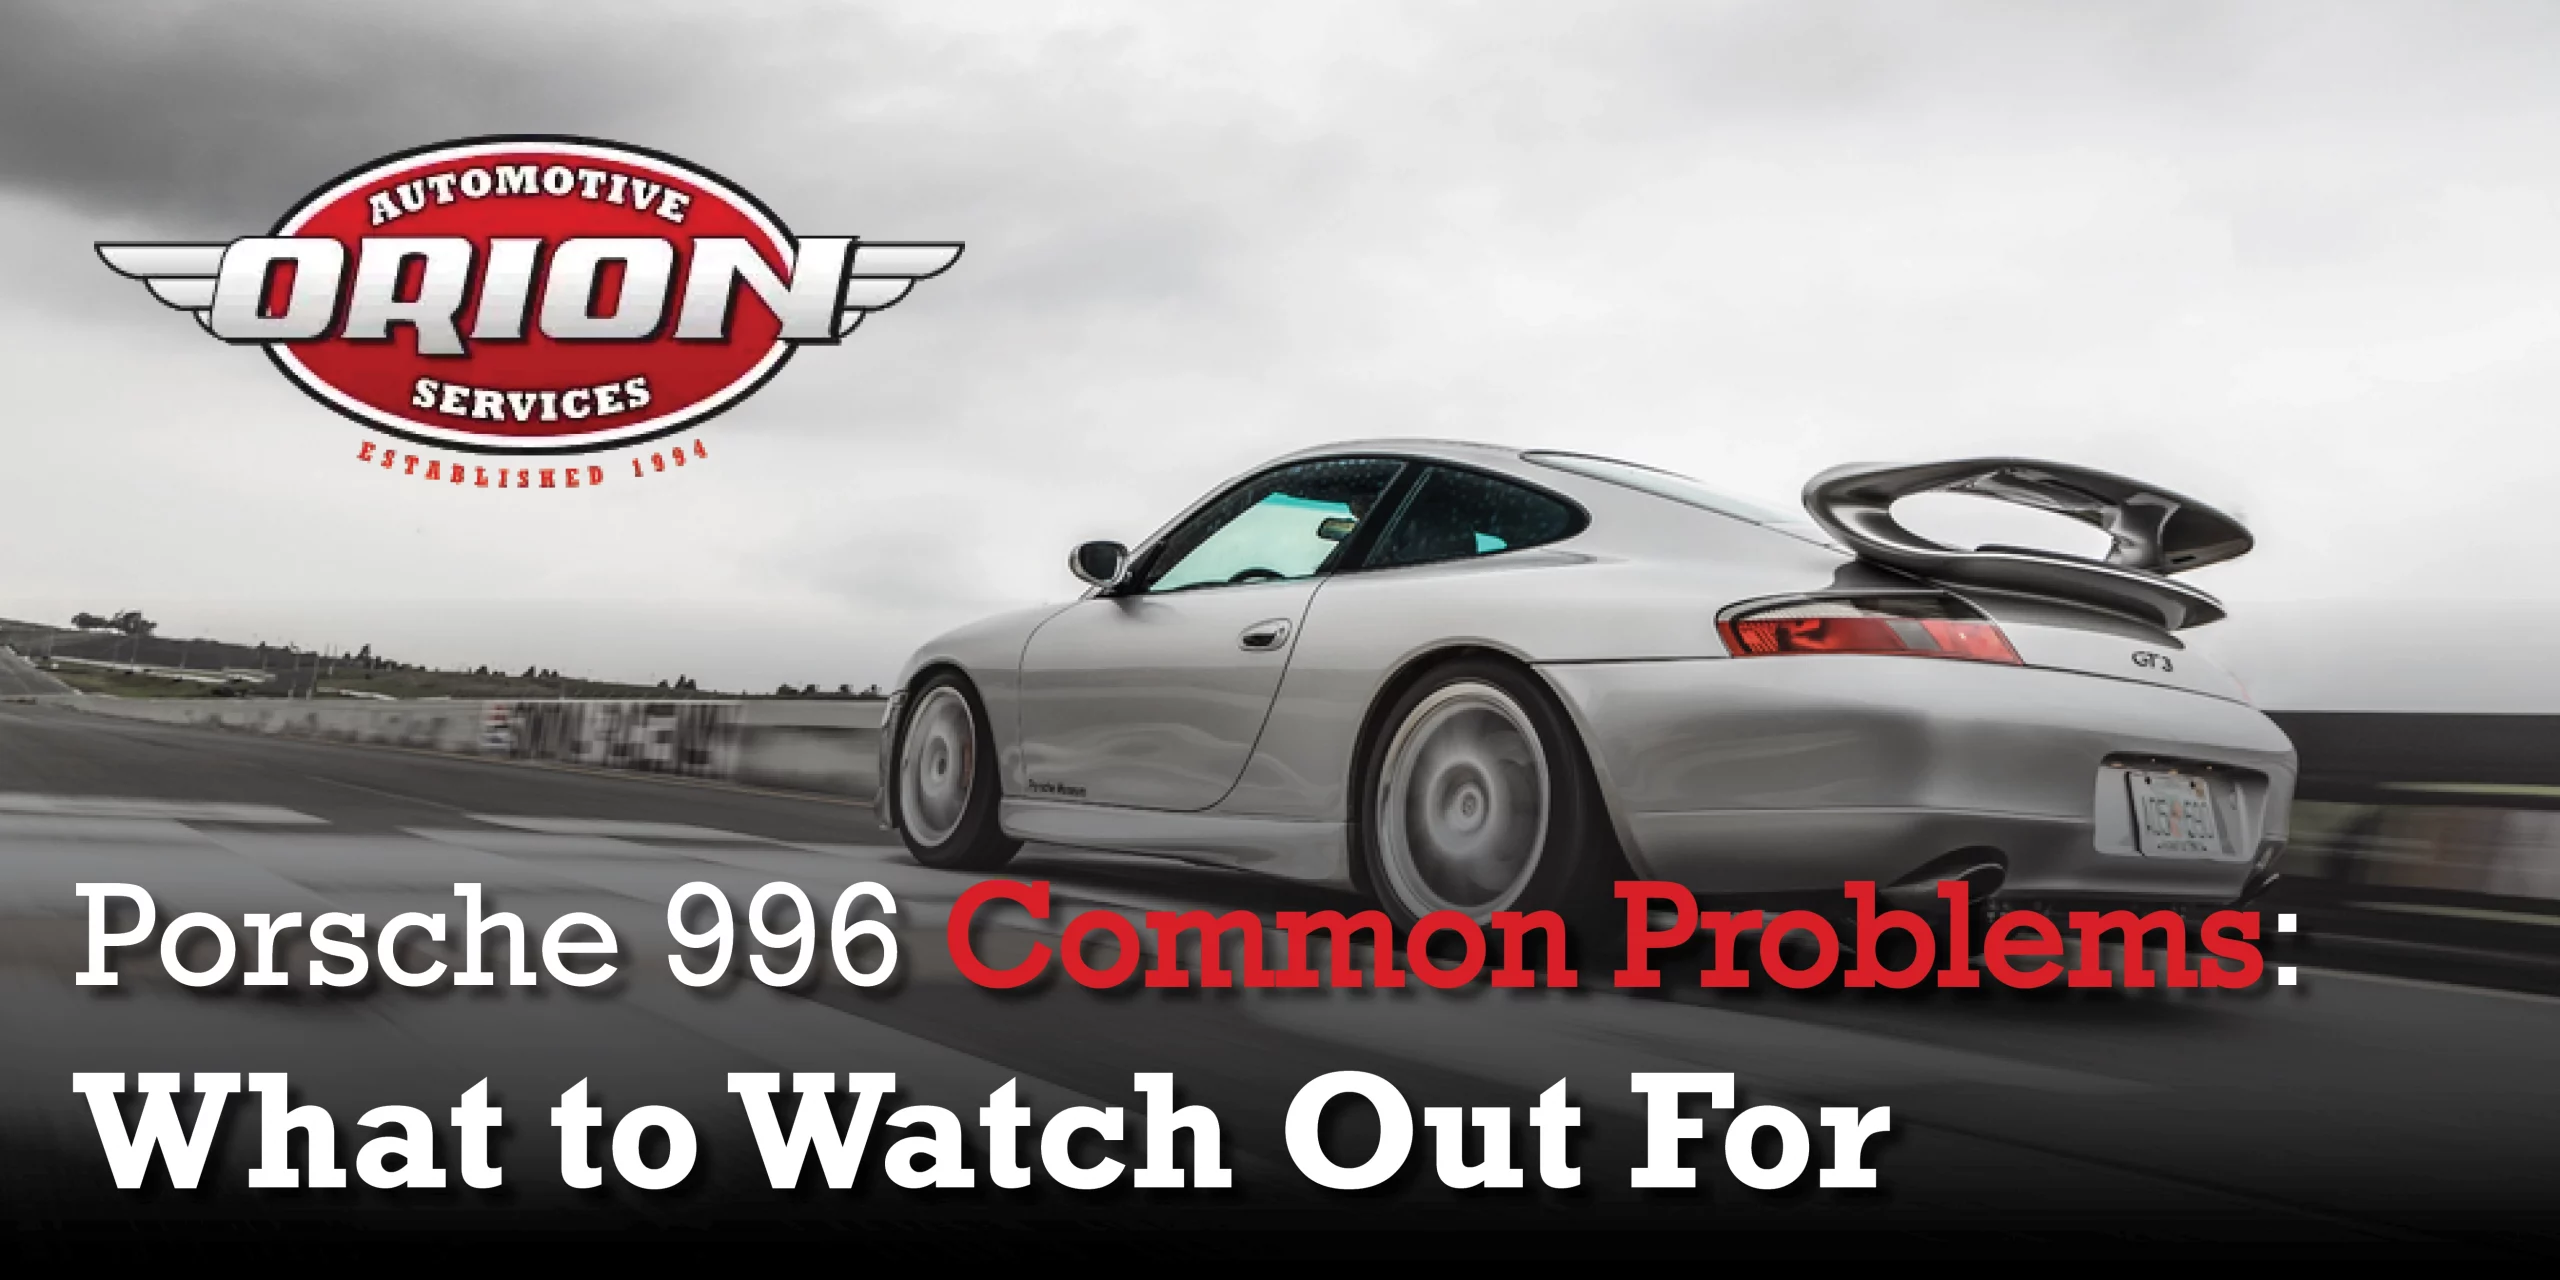 Porsche 996 Common Problems: What to Watch Out For